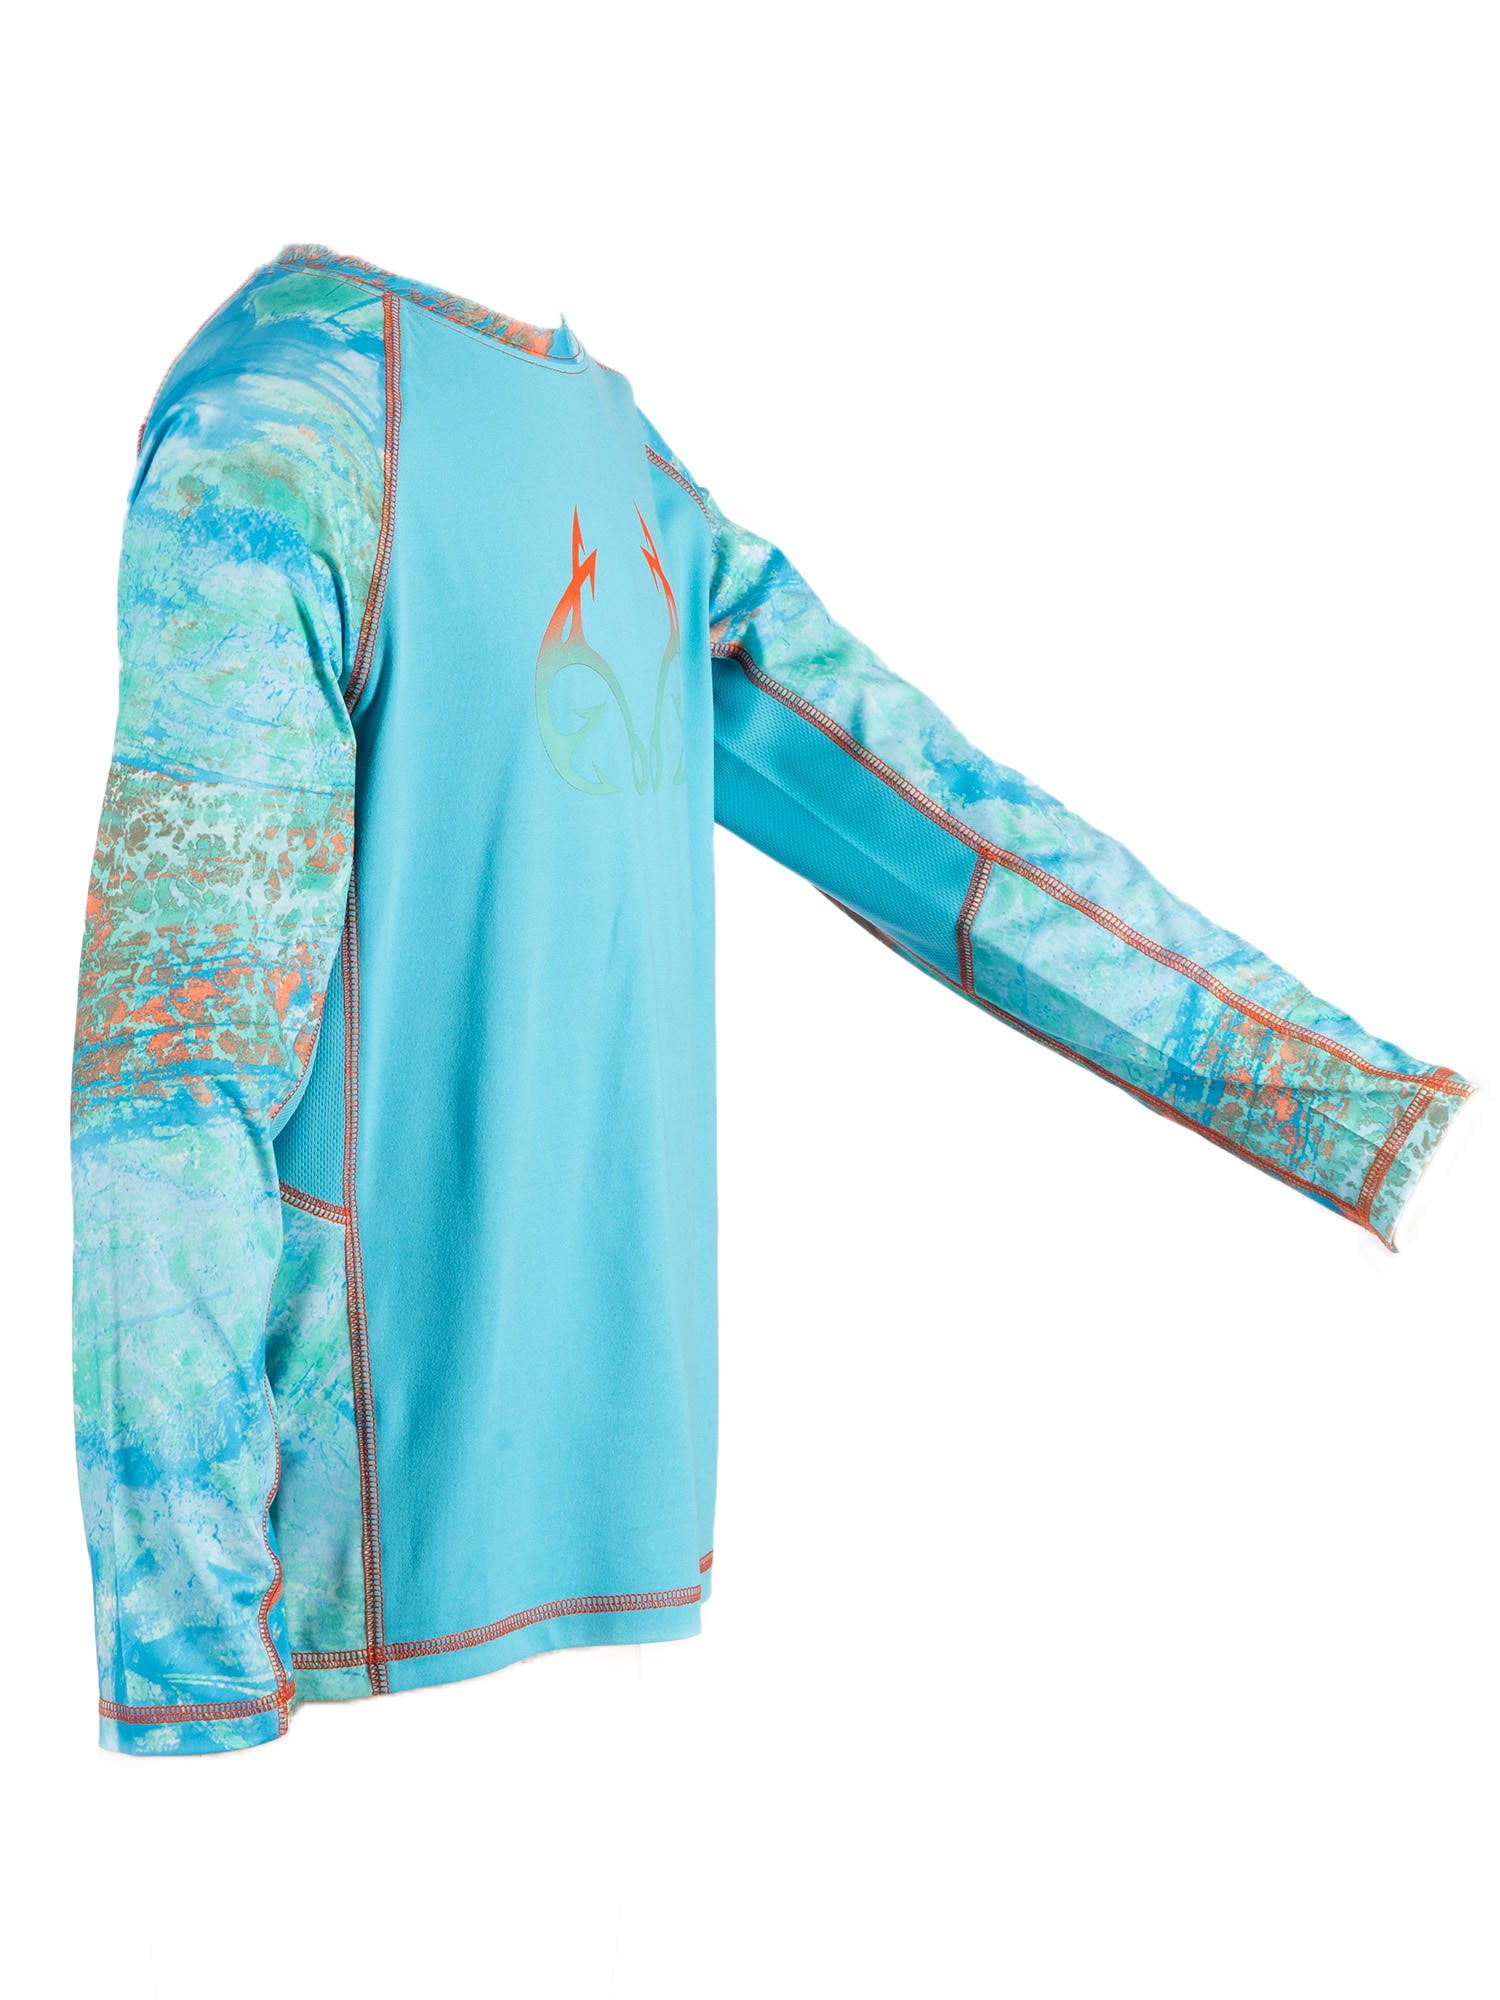 Affordable Wholesale kids long sleeve fishing shirt For Smooth Fishing 